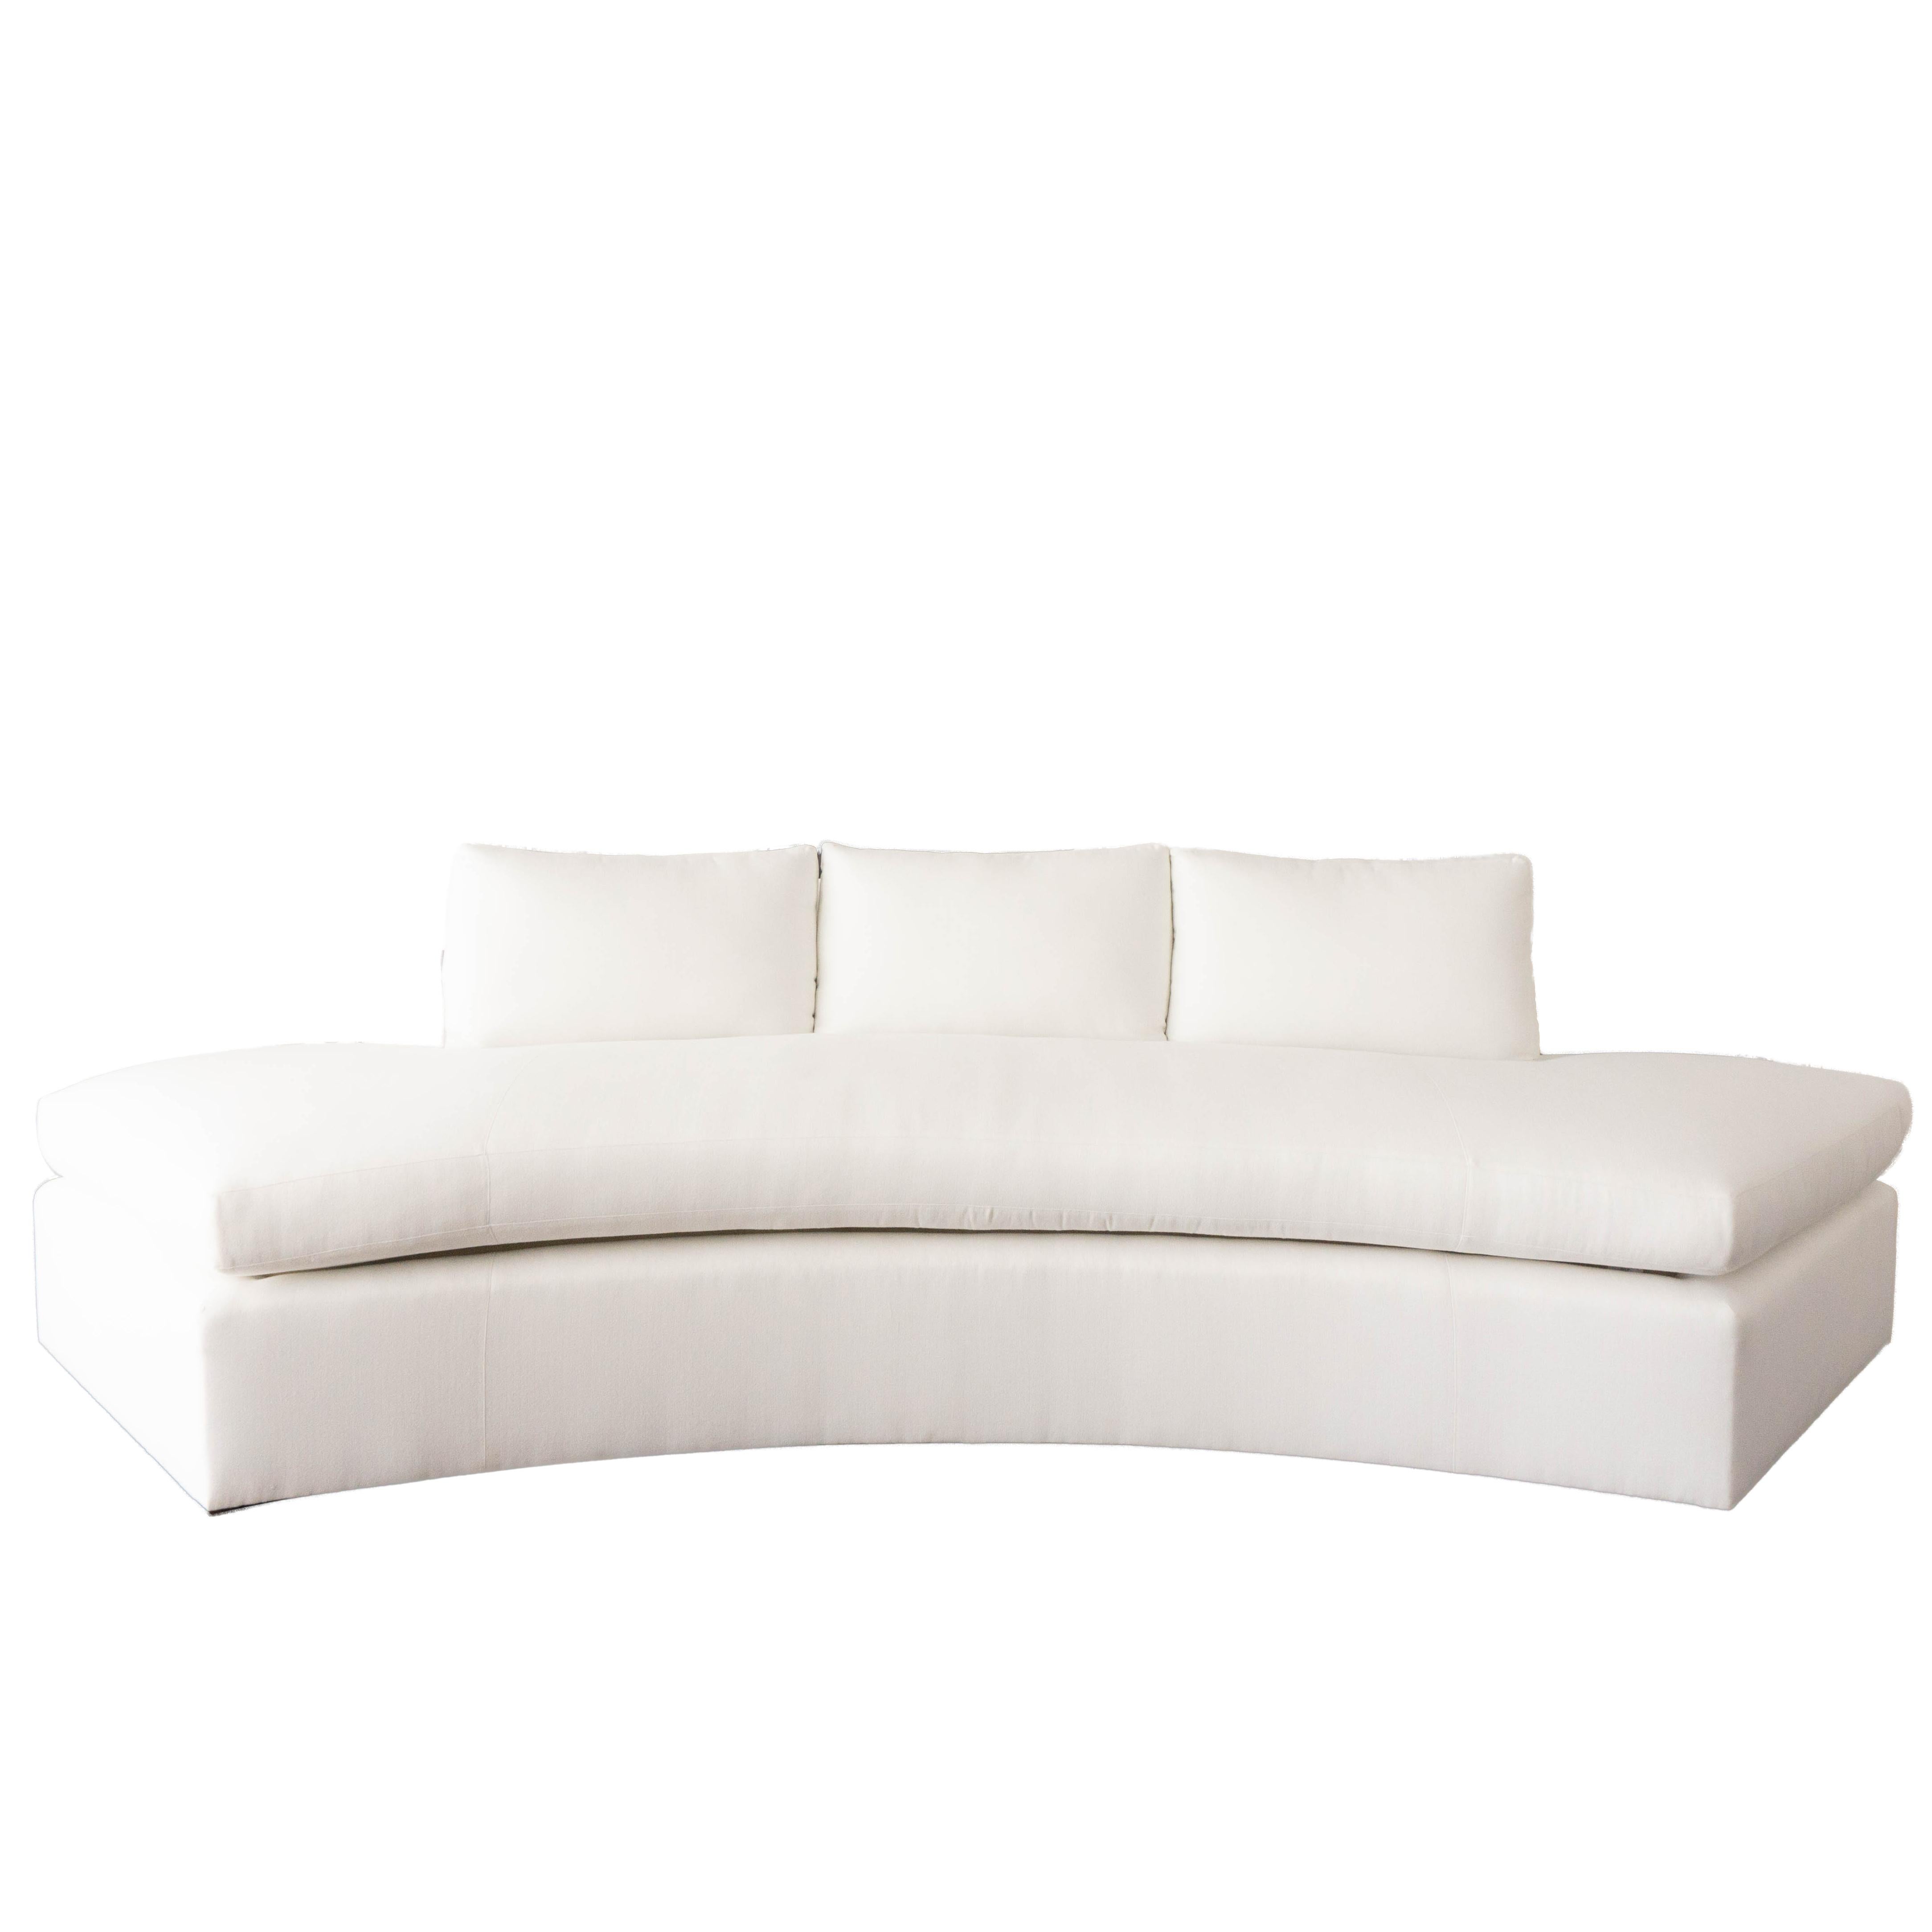 This modern curved sofa is built to order and features 3 loose back cushions with a single cushioned seat. This piece is customizable and can be built to the size specifications of your liking. 

COM (Customers' Own Material) Price: